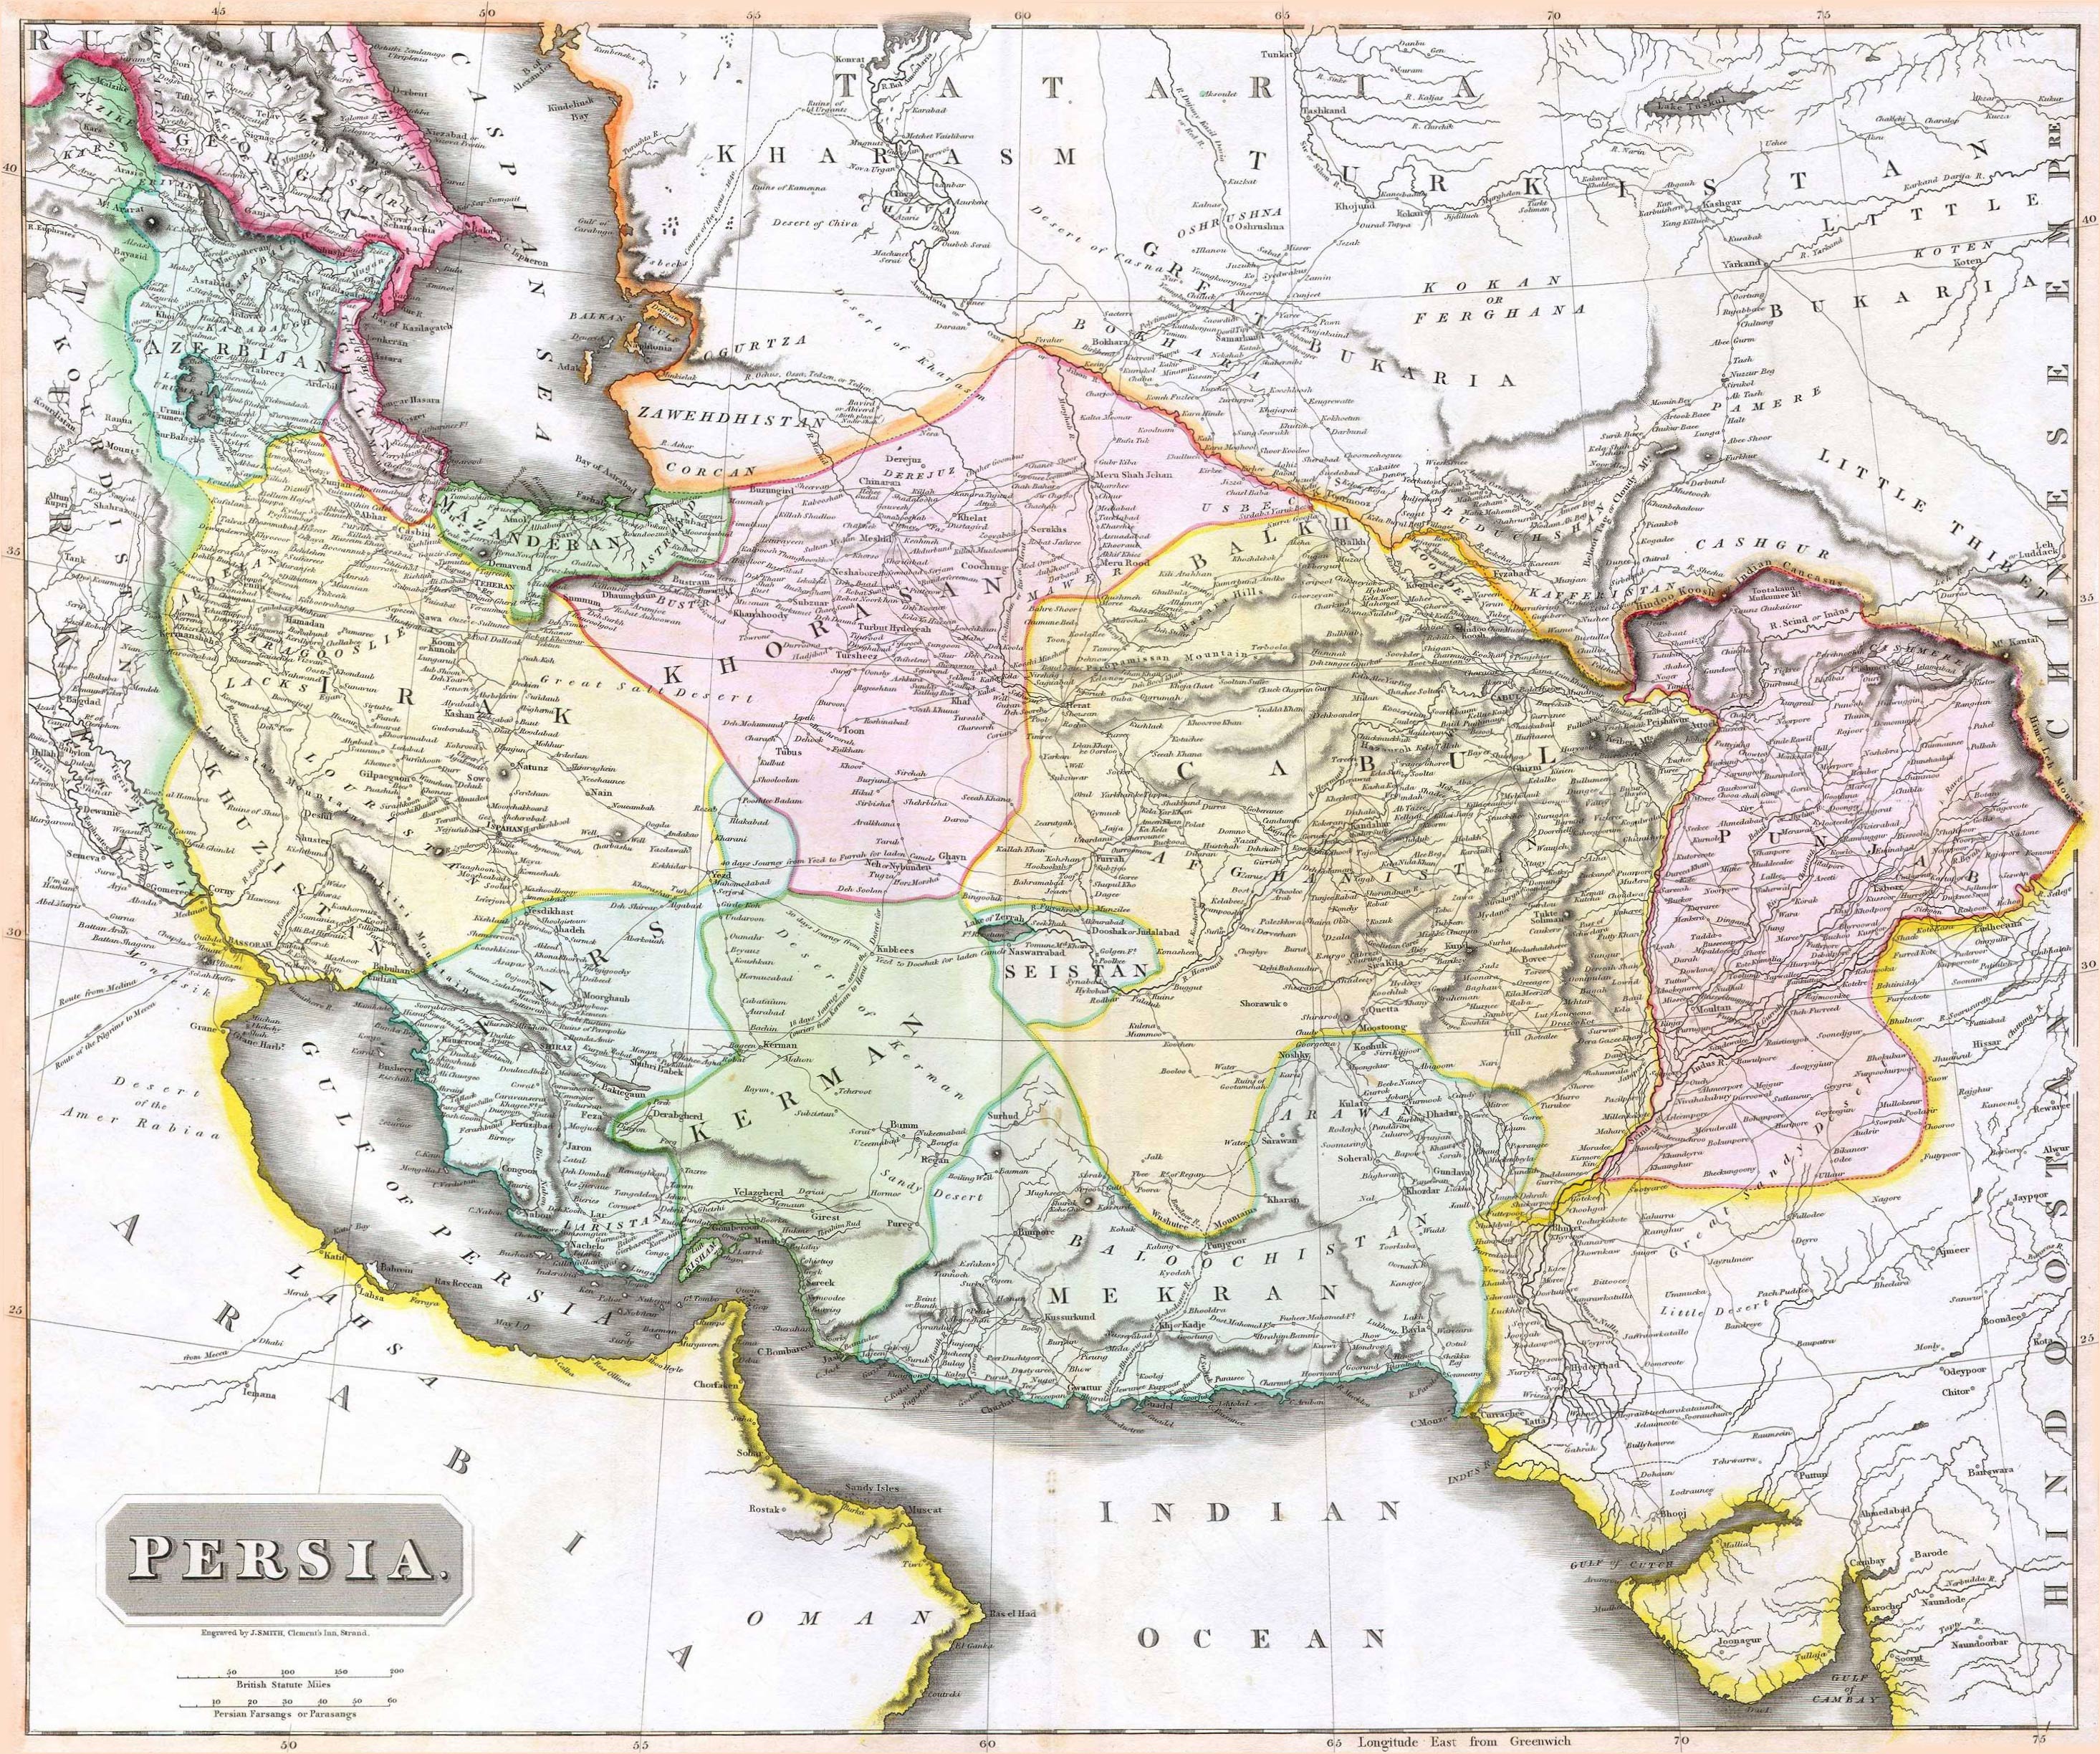 1814 map of Central Asia, where great power competition between Russia and the British became known as The Great Game.